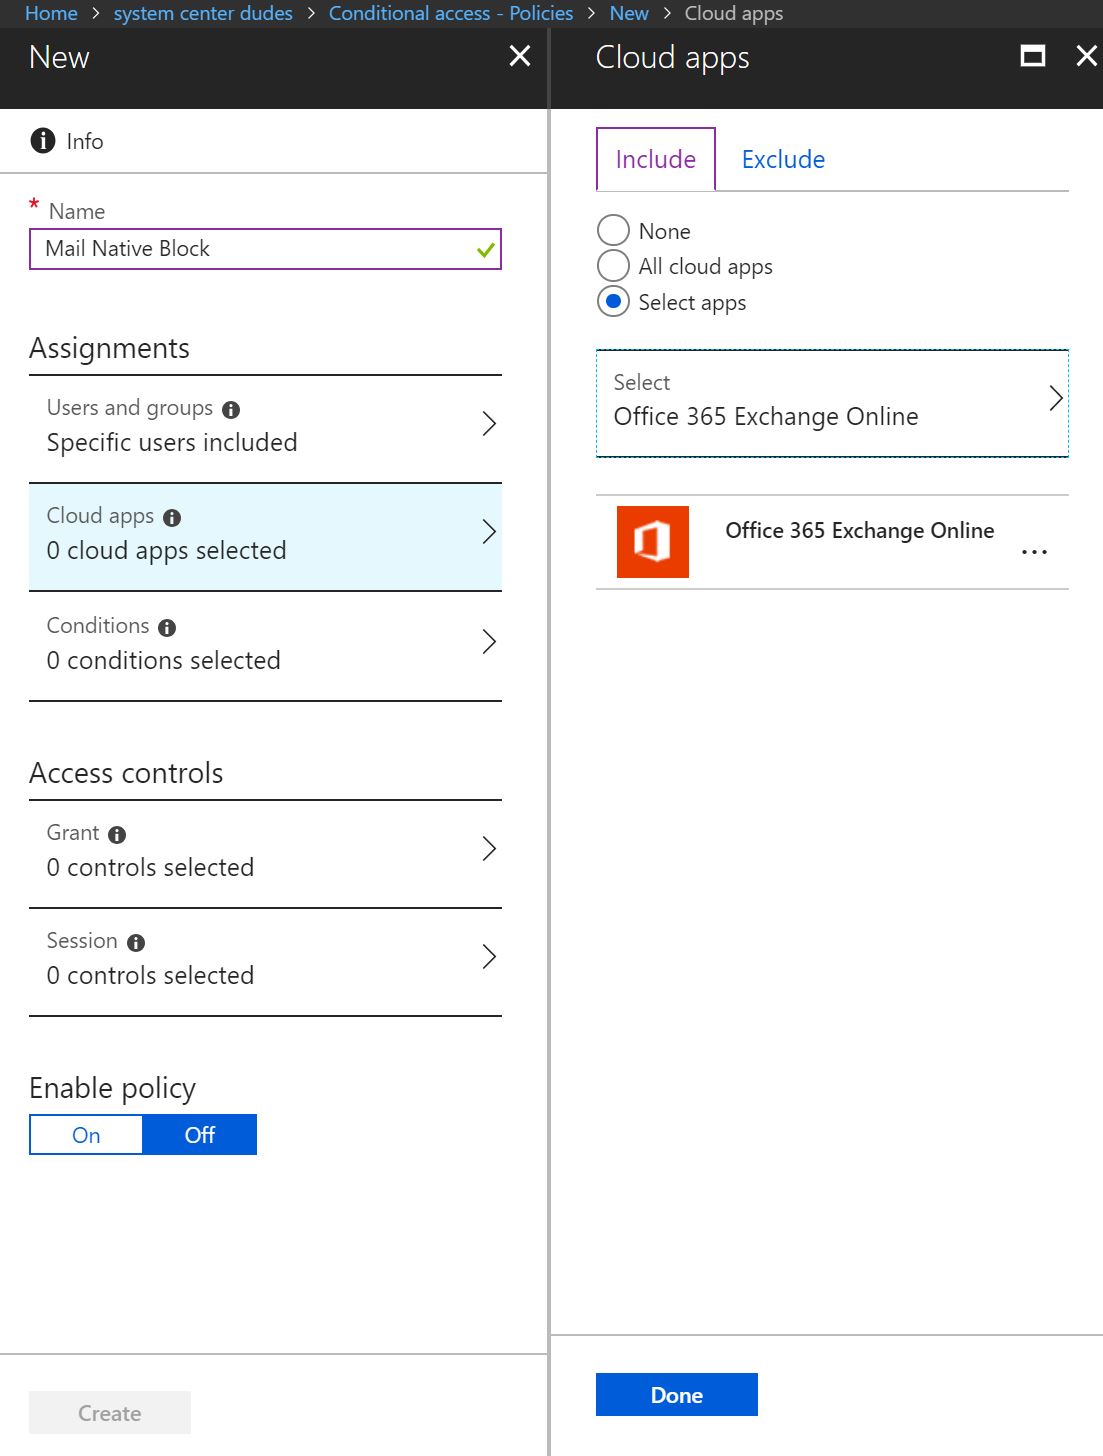 Conditional access blocking Basic Authentication